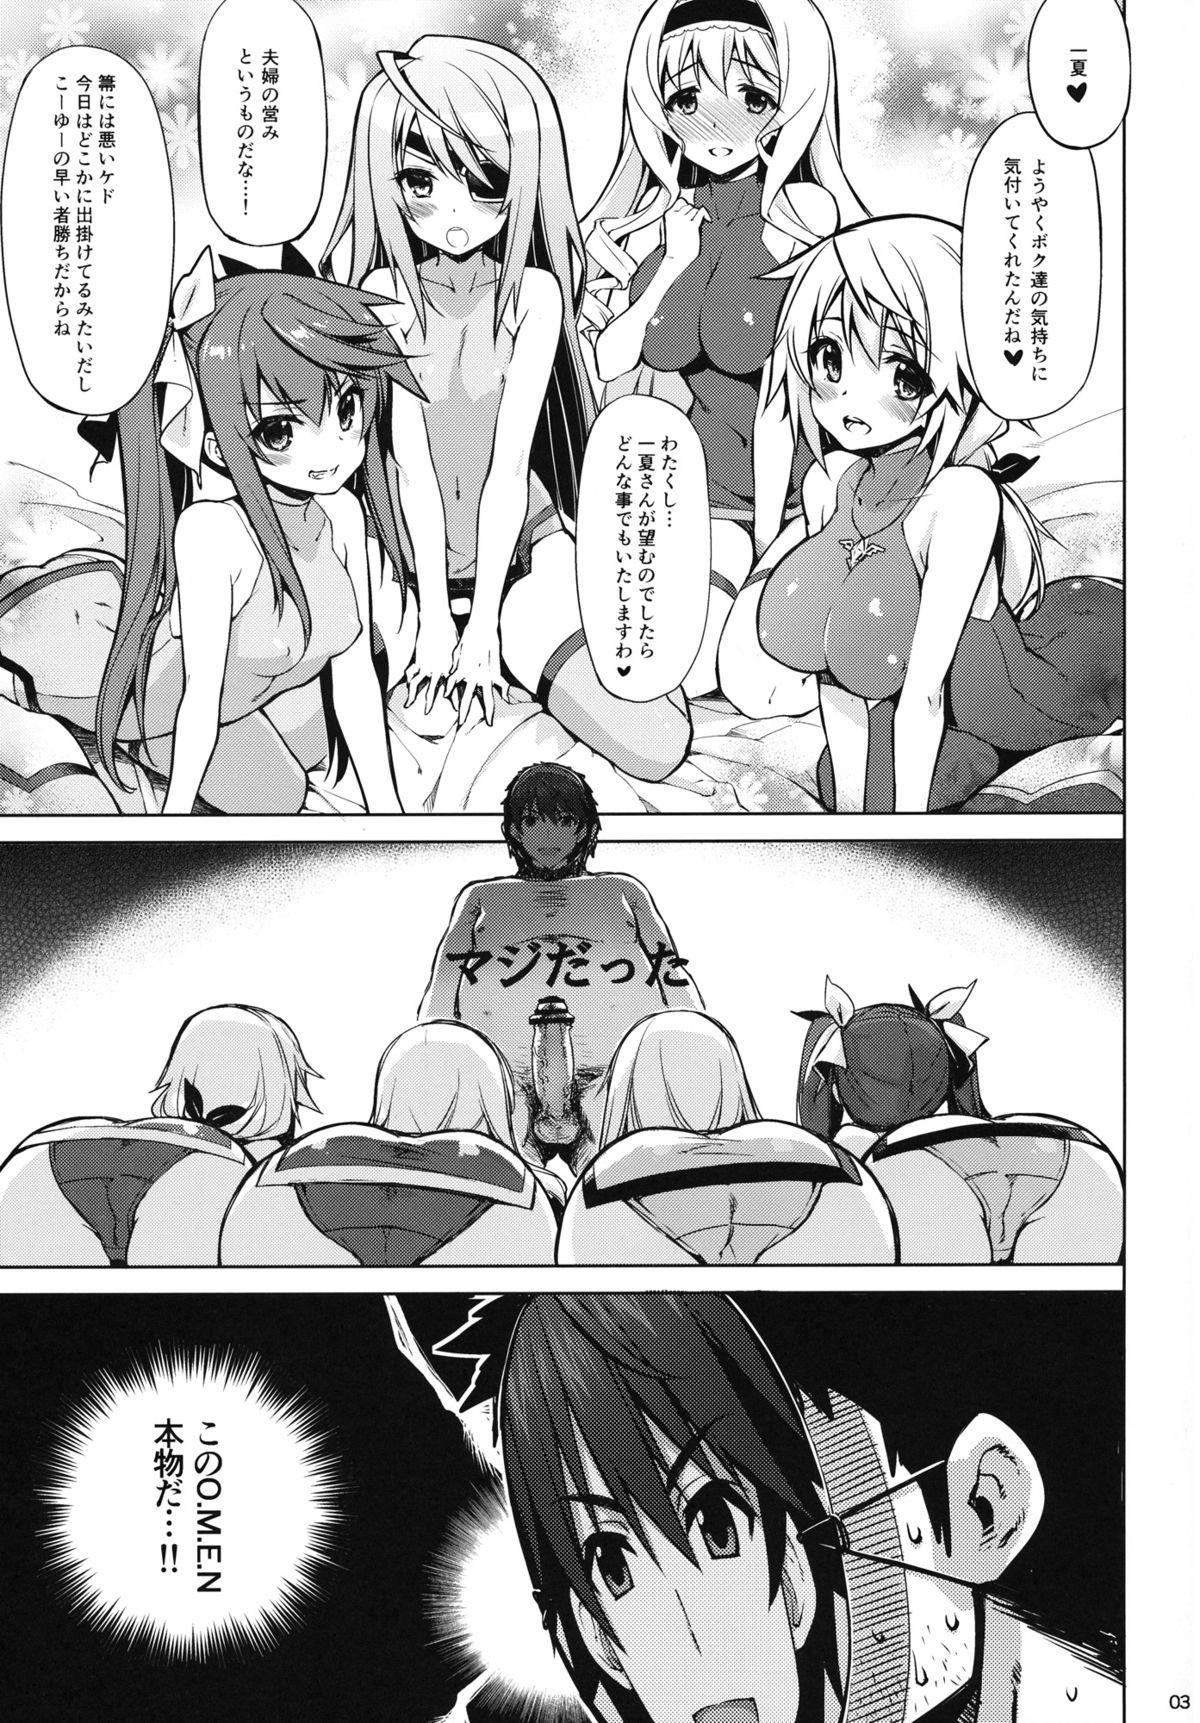 Pale ONE night SUMMER - Infinite stratos Cam Sex - Page 2